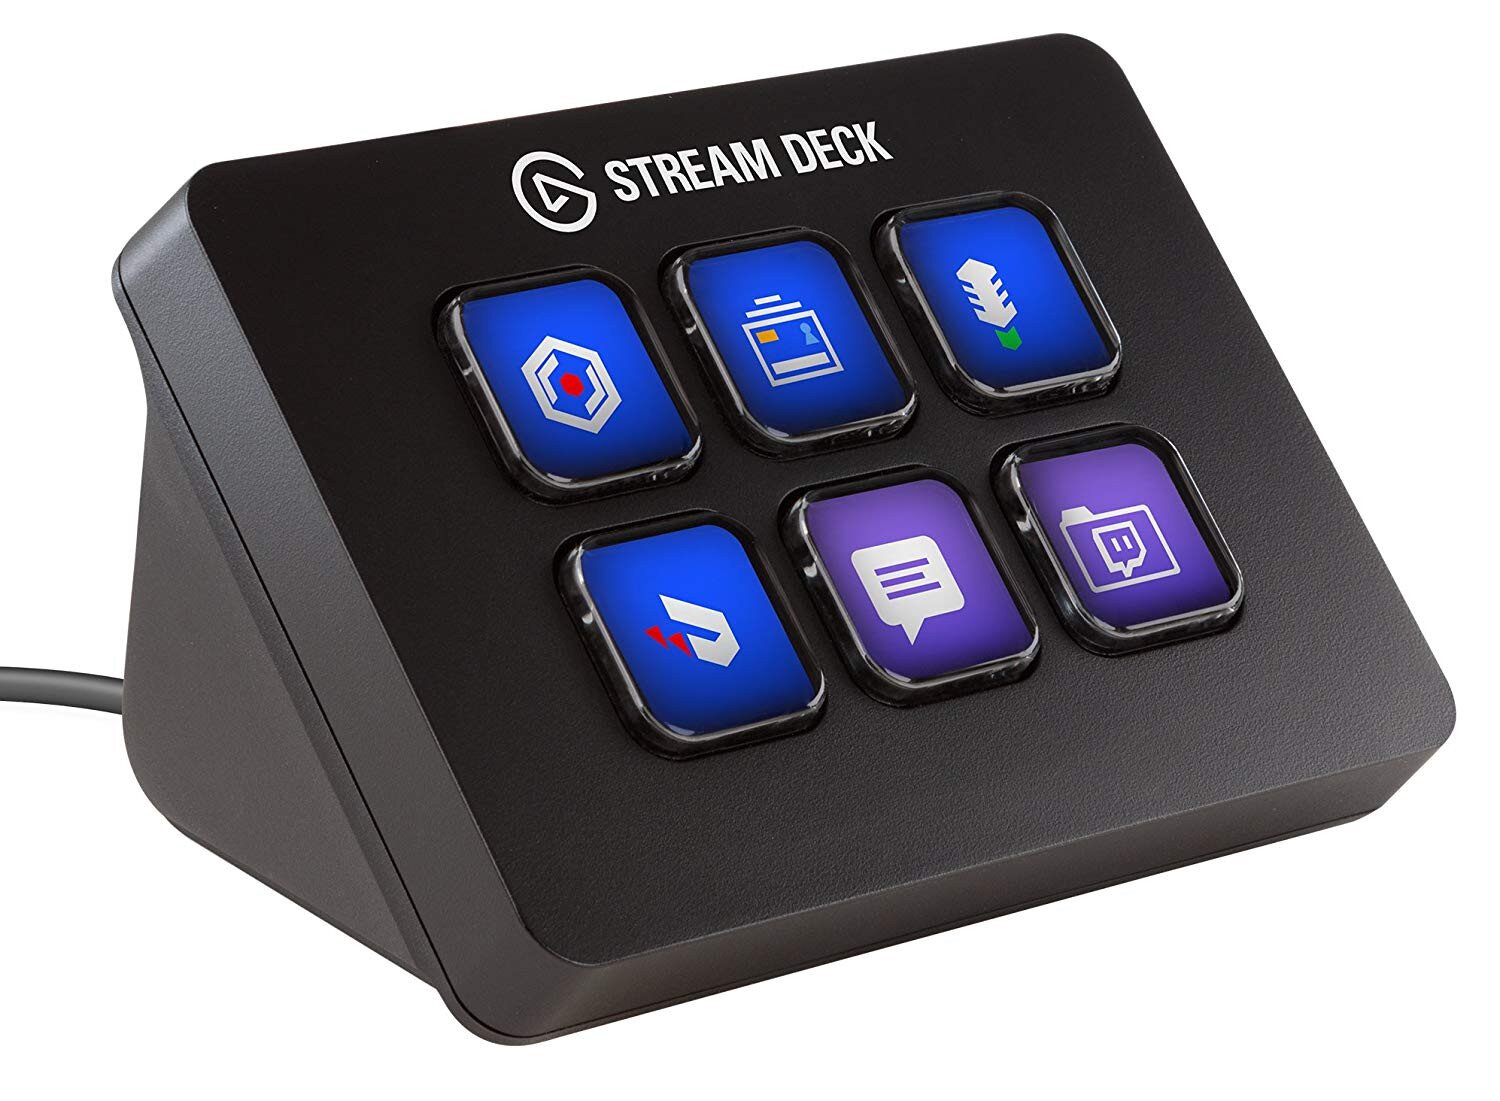 is the stream deck good